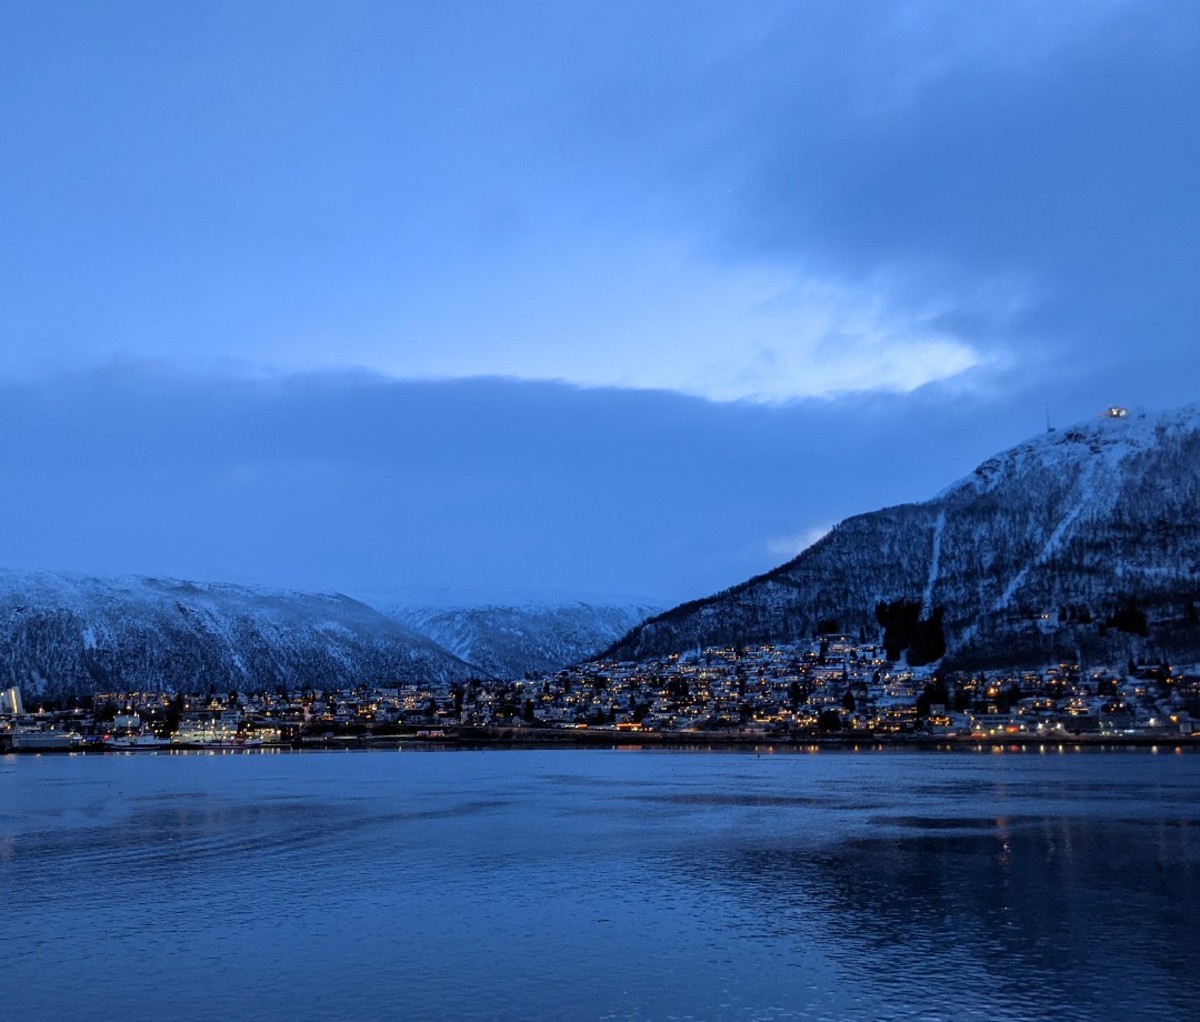 Evening view of Tromsø, Norway from the water.